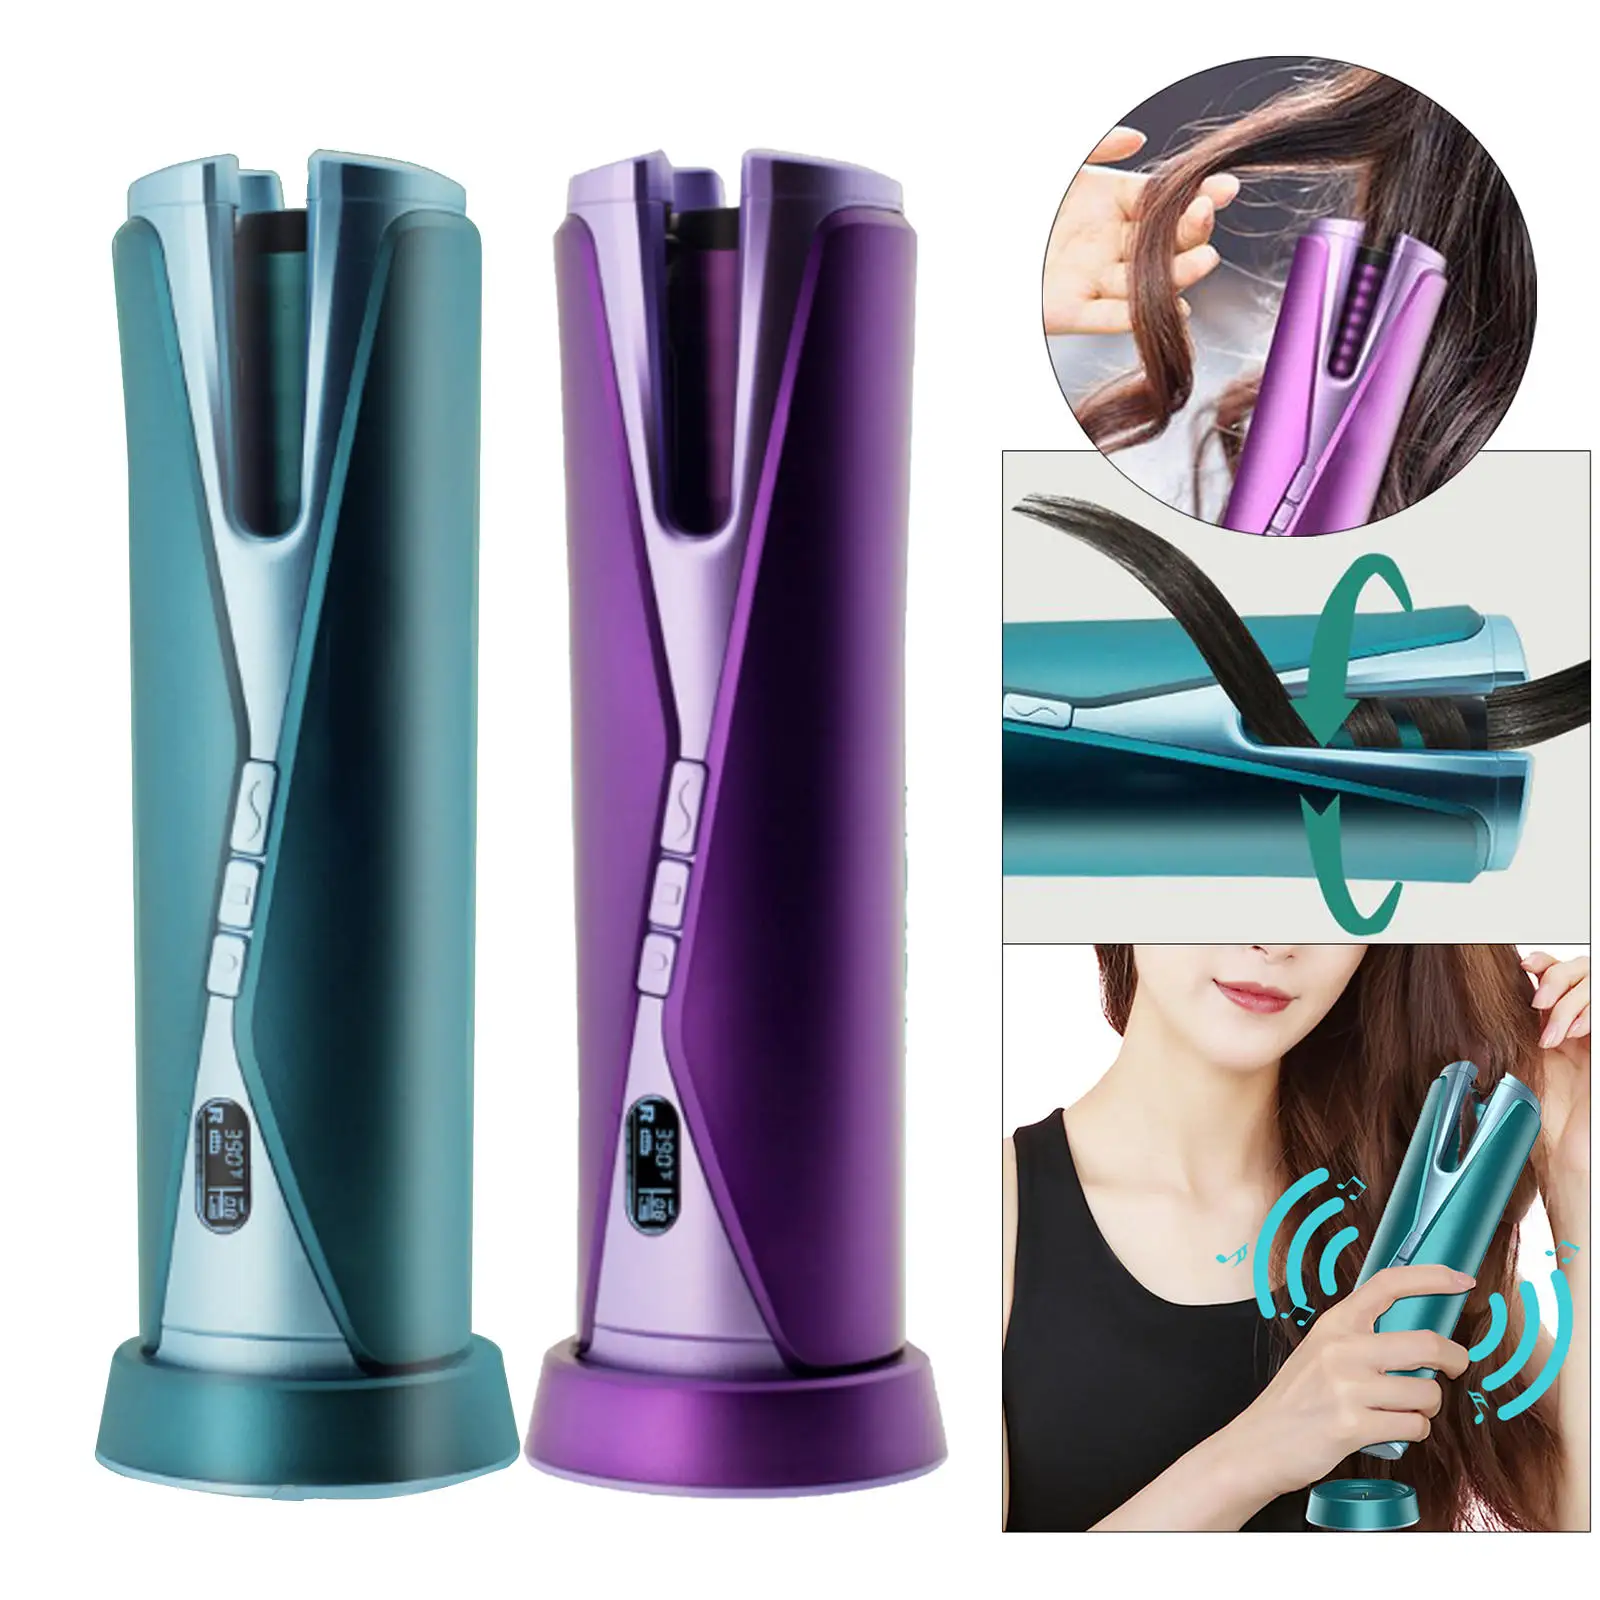 Portable Automatic Hair Rollers Curler with LCD Display Adjustable Music Curling Iron for Waver Styling